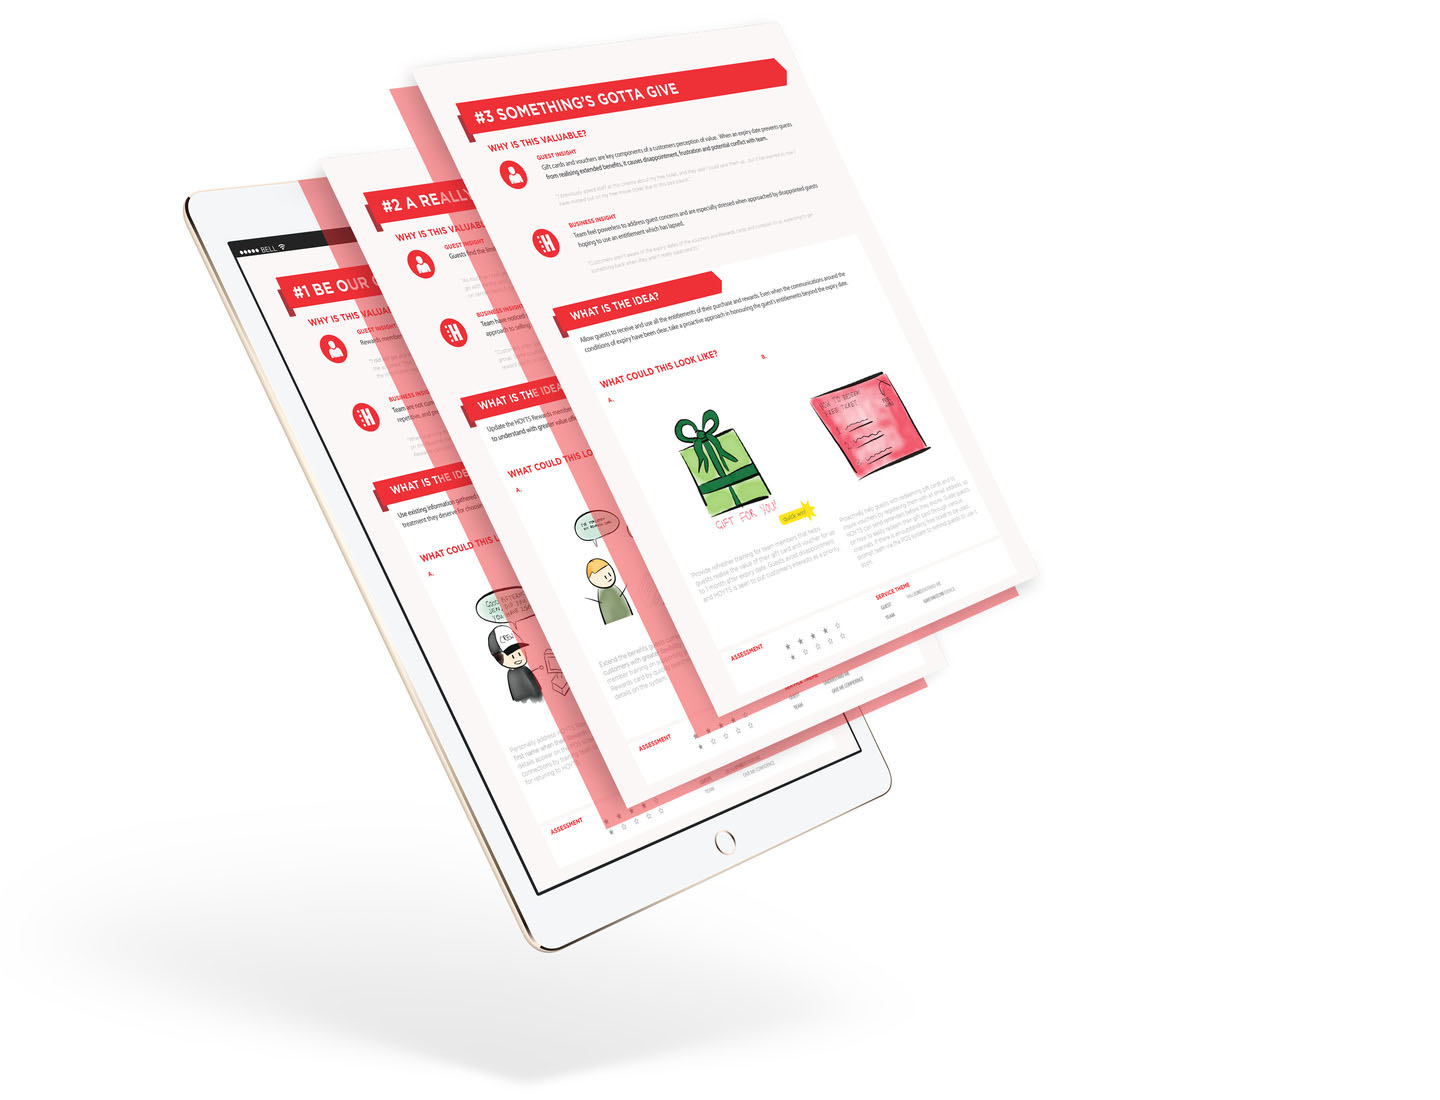 Hoyts insights and initiative cards displayed on an ipad through graphic illustration